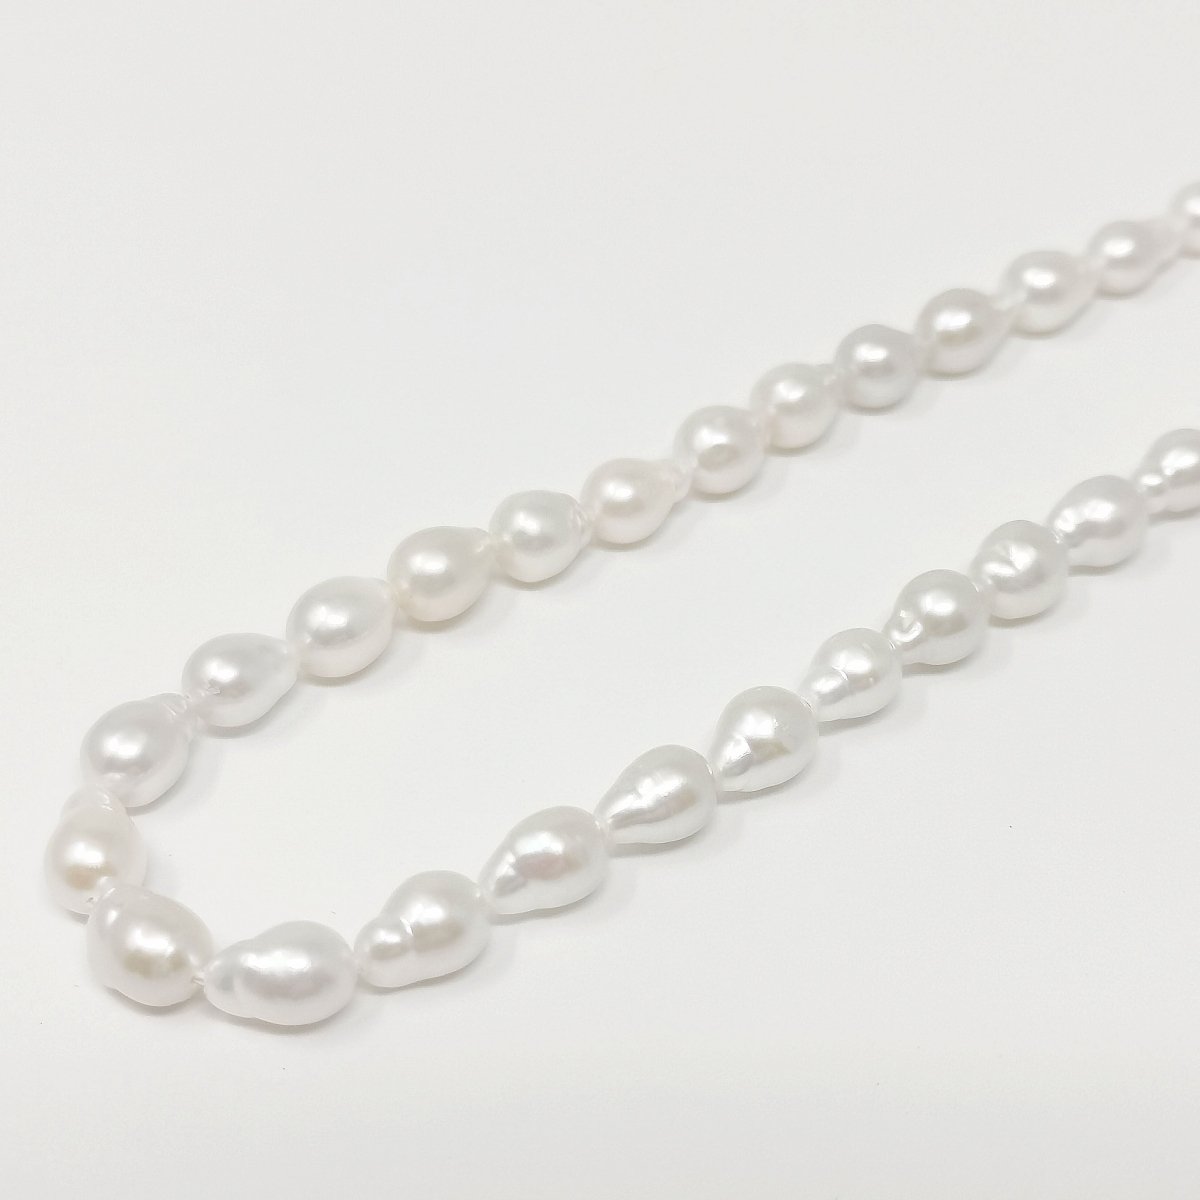 3-3.5mm AAA Natural White Tiny Seed Rice Freshwater Pearl Beads, Genuine Freshwater Pearls,Cultured White Small Seed Pearls,Tiny Pearls - DLUXCA